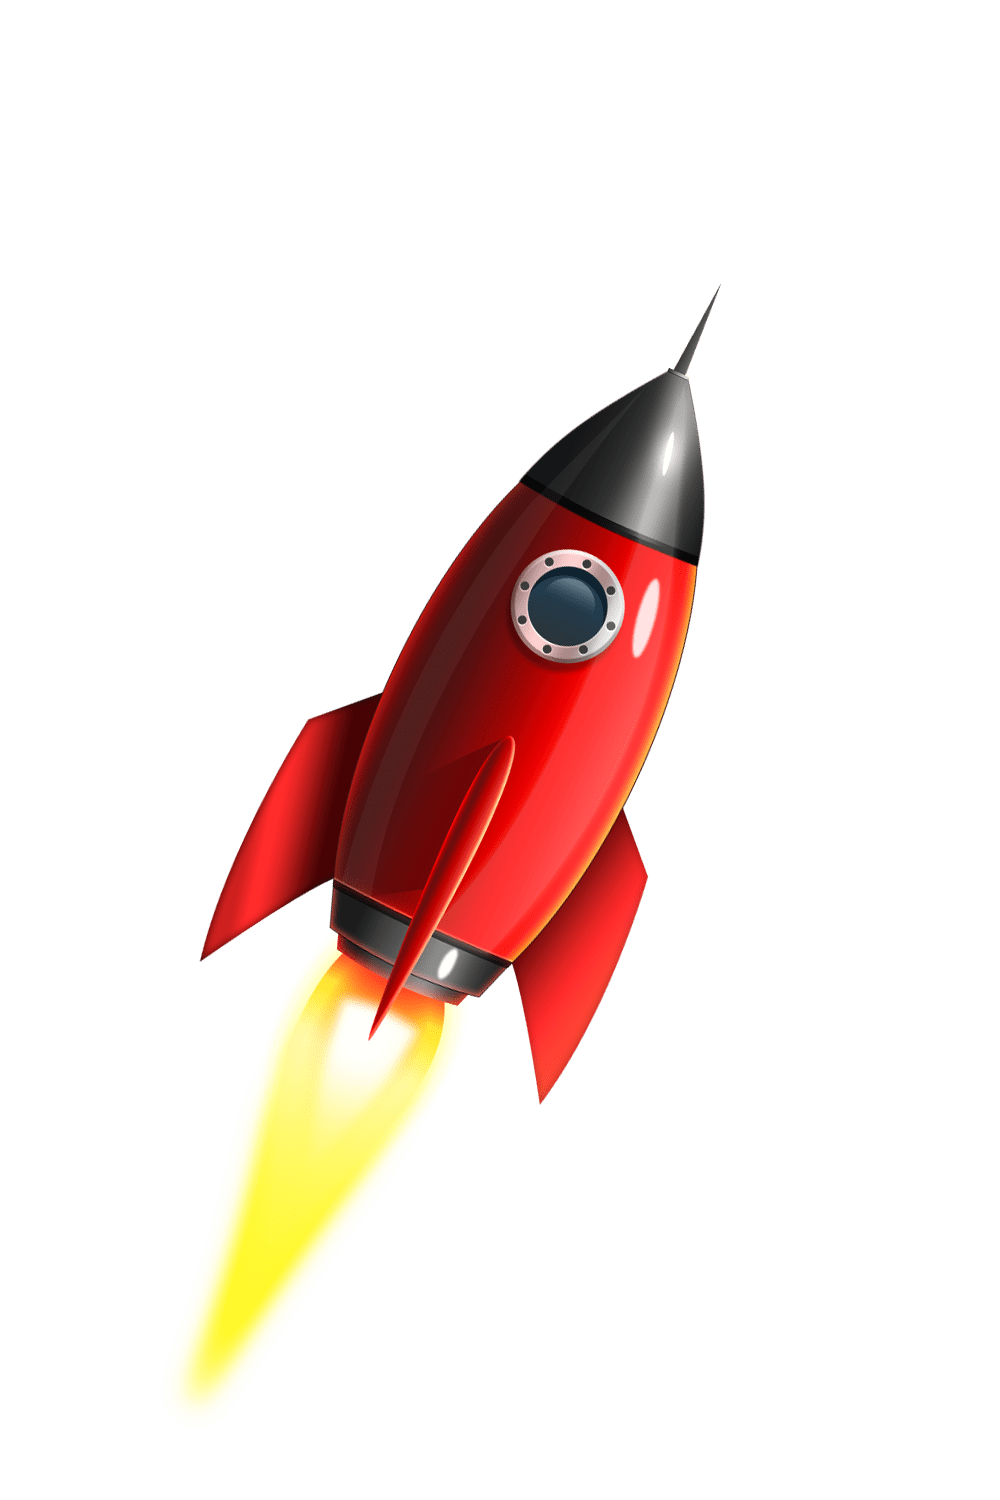 Rocket image with a loop animation up and down smoothly